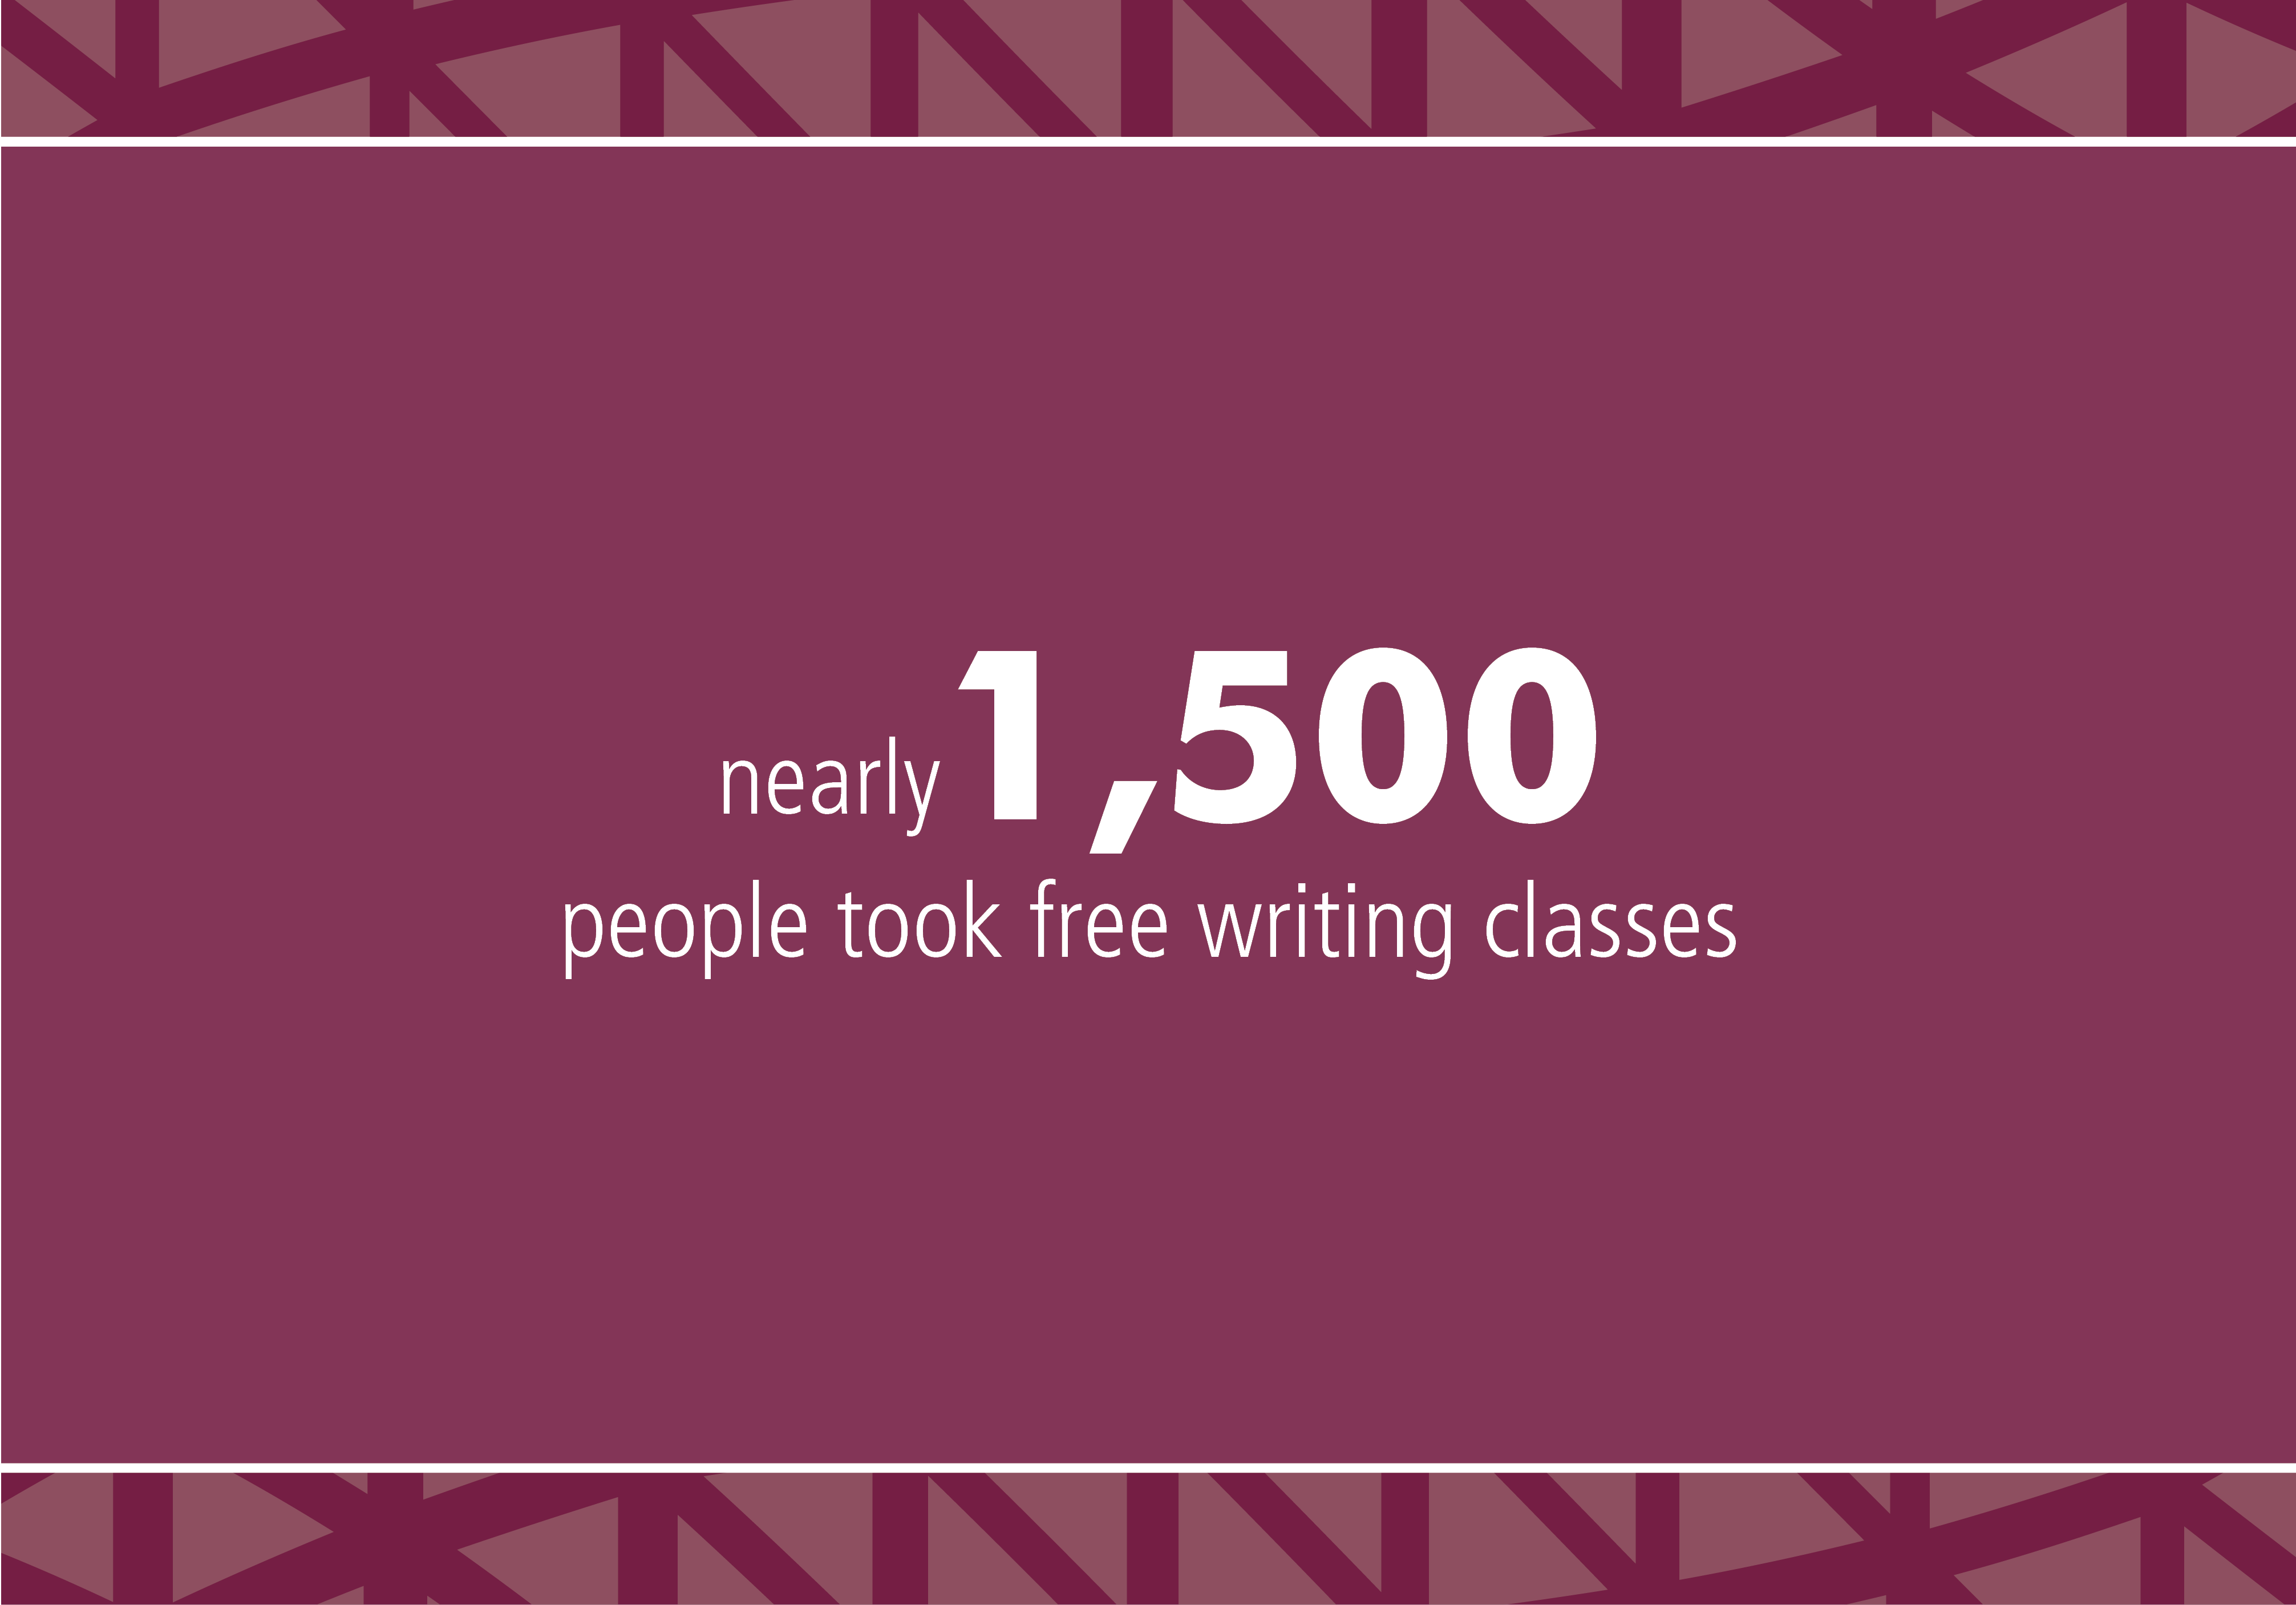 Nearly 1,500 people took free writing classes